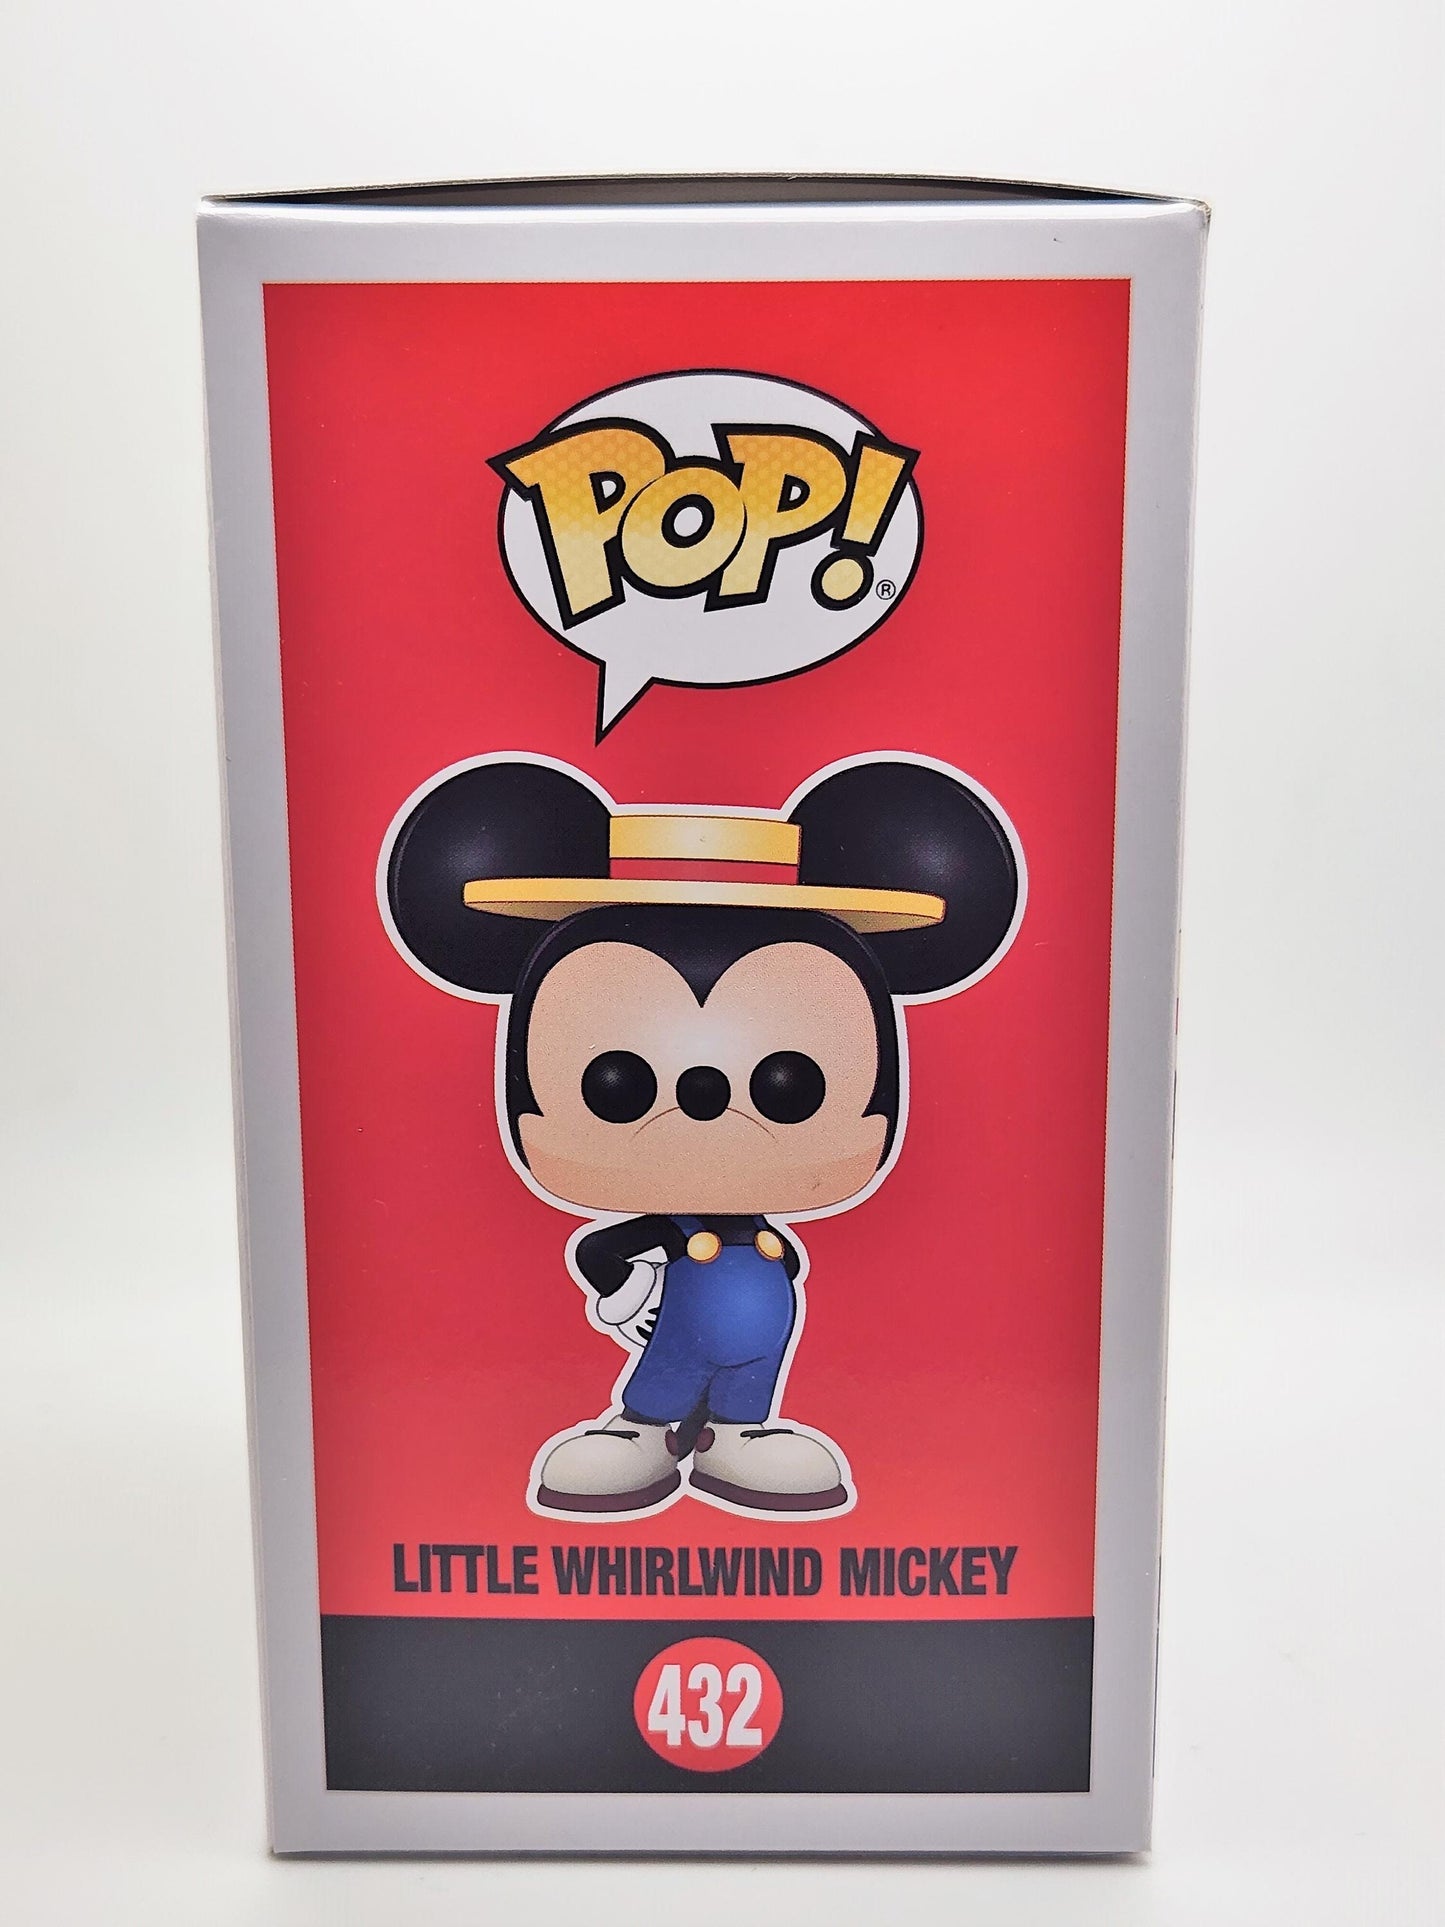 Little Whirlwind Mickey - #432 - Box Condition 9/10 -